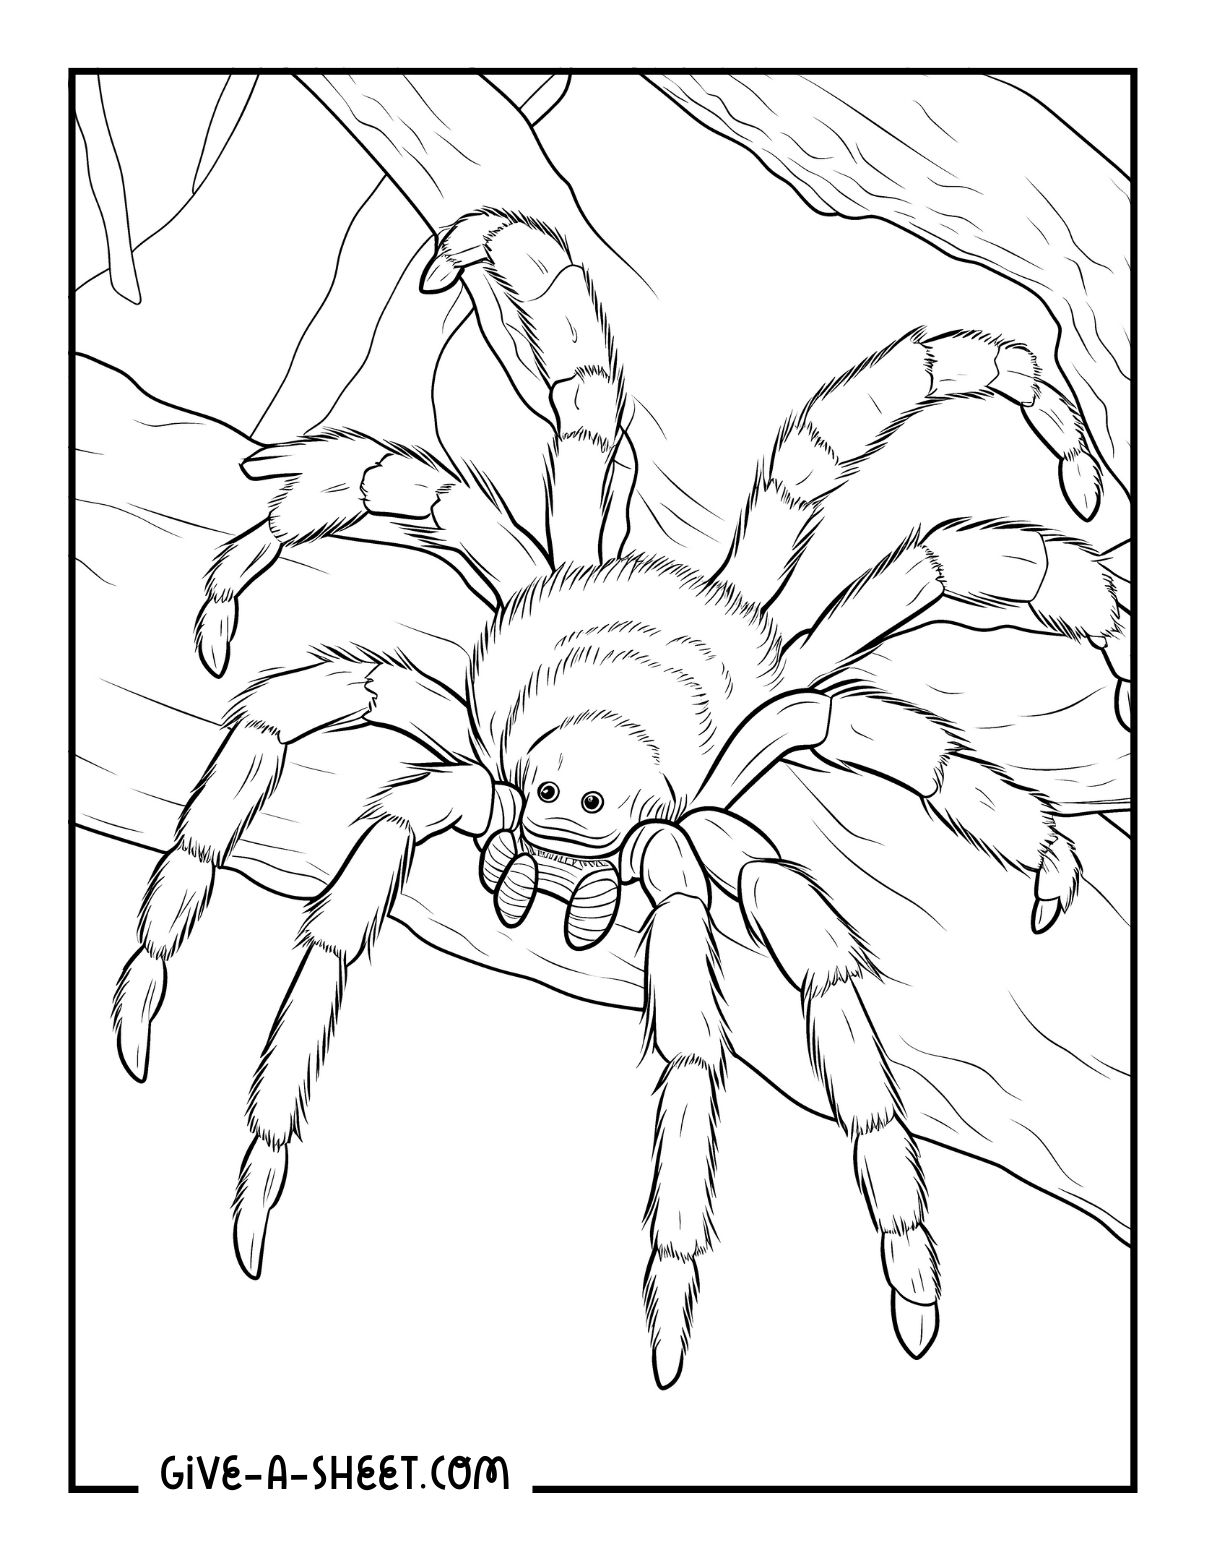 Realistic designs of tarantula animal coloring page isolated.